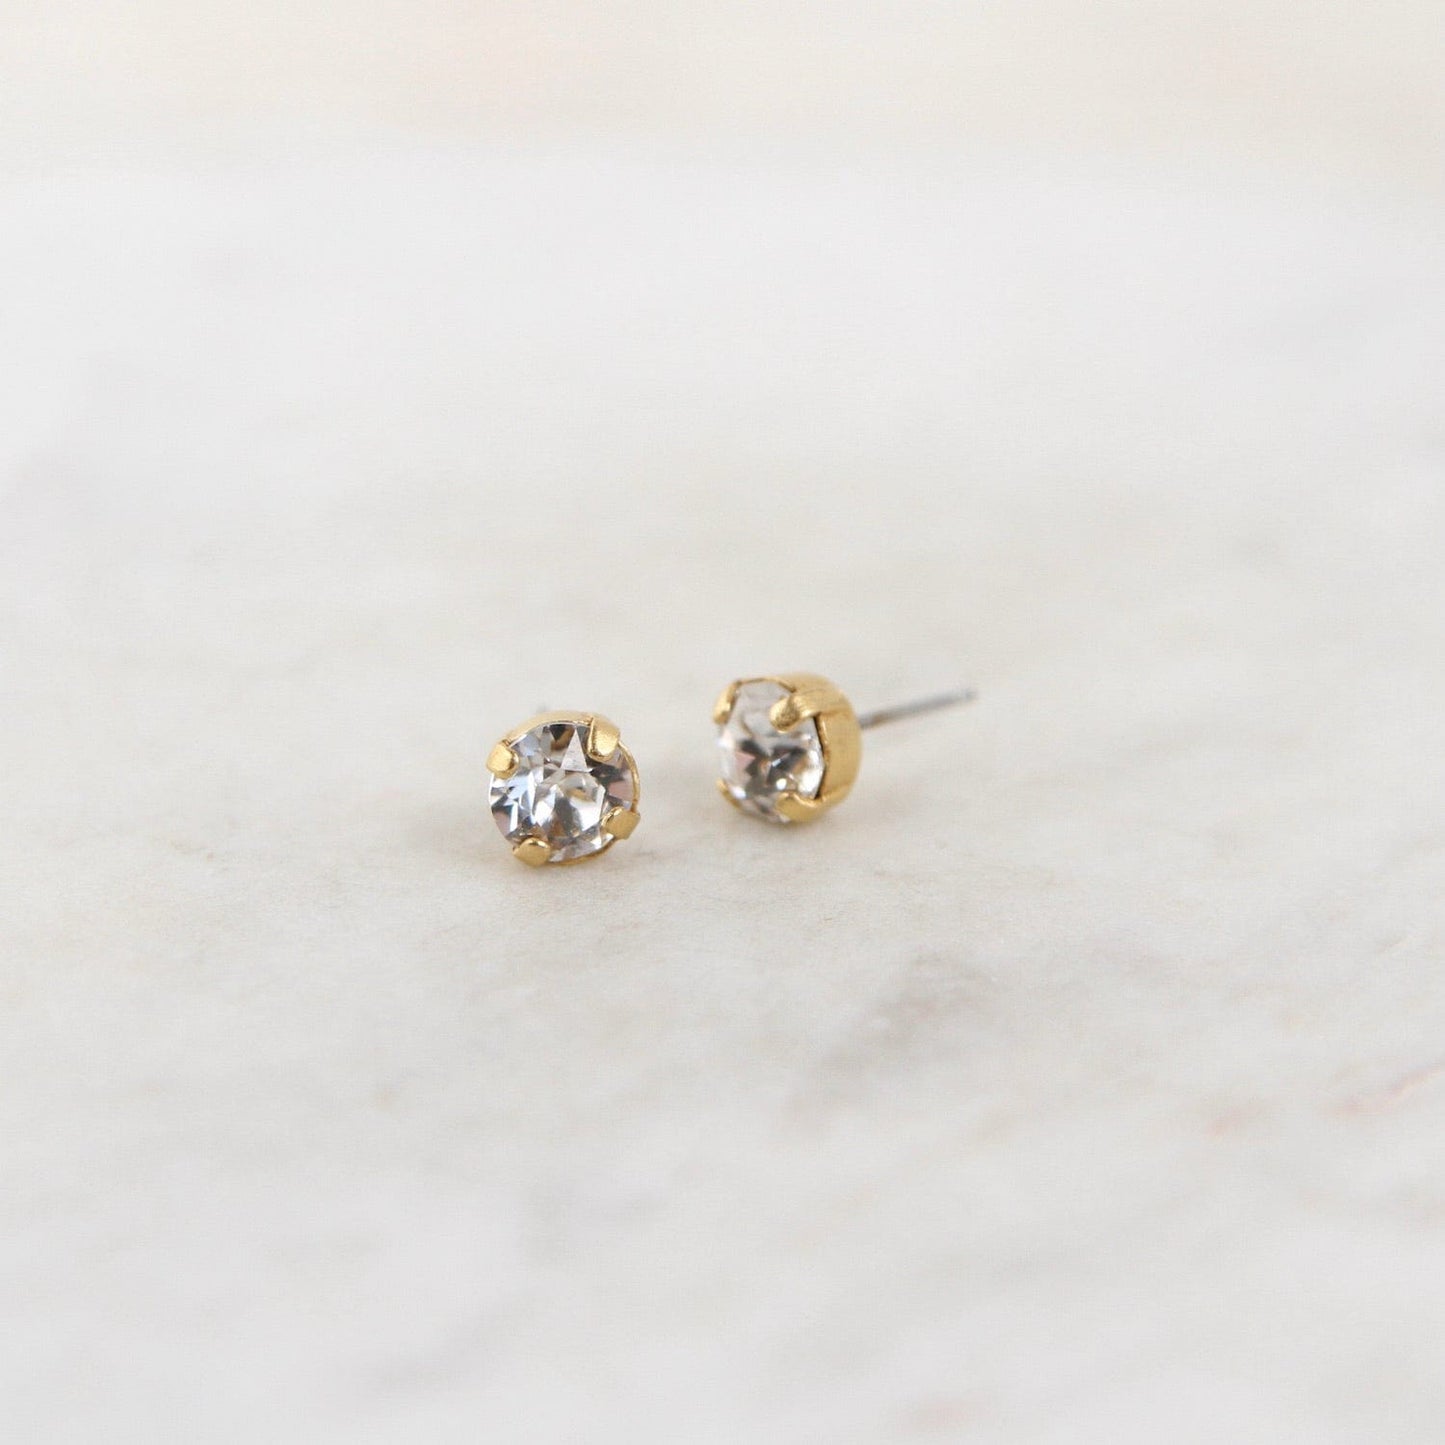 EAR-JM Round Ice Post Earring- Gold Plate